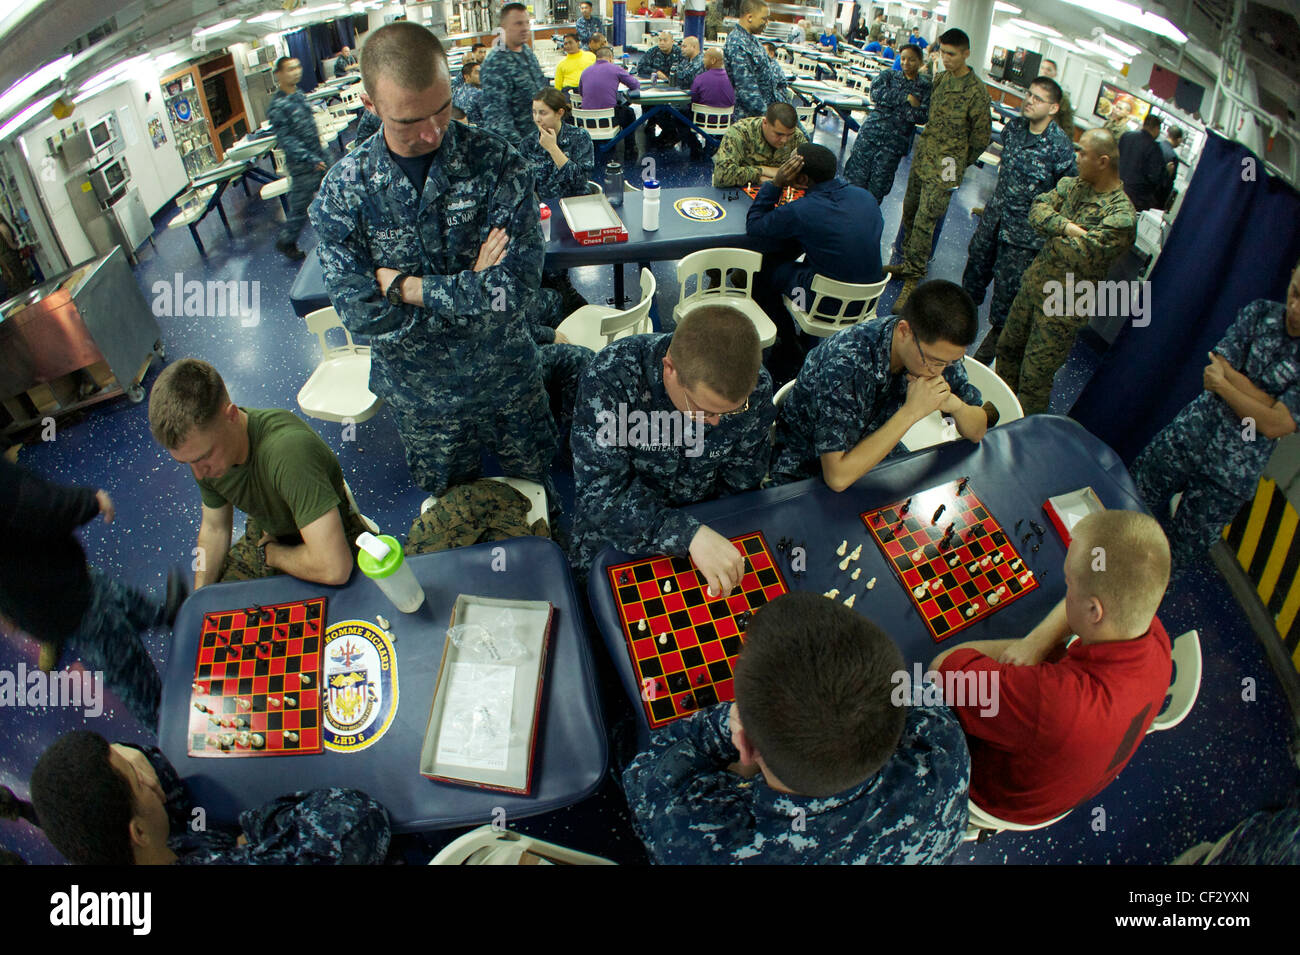 PACIFIC OCEAN (Feb. 28, 2012) Sailors and Marines participate in a chess tournament in the mess decks of the amphibious assault ship USS Bonhomme Richard (LHD 6). The ship is en route to relieve USS Essex (LHD 2) as the forward deployed ship in Sasebo, Japan Stock Photo